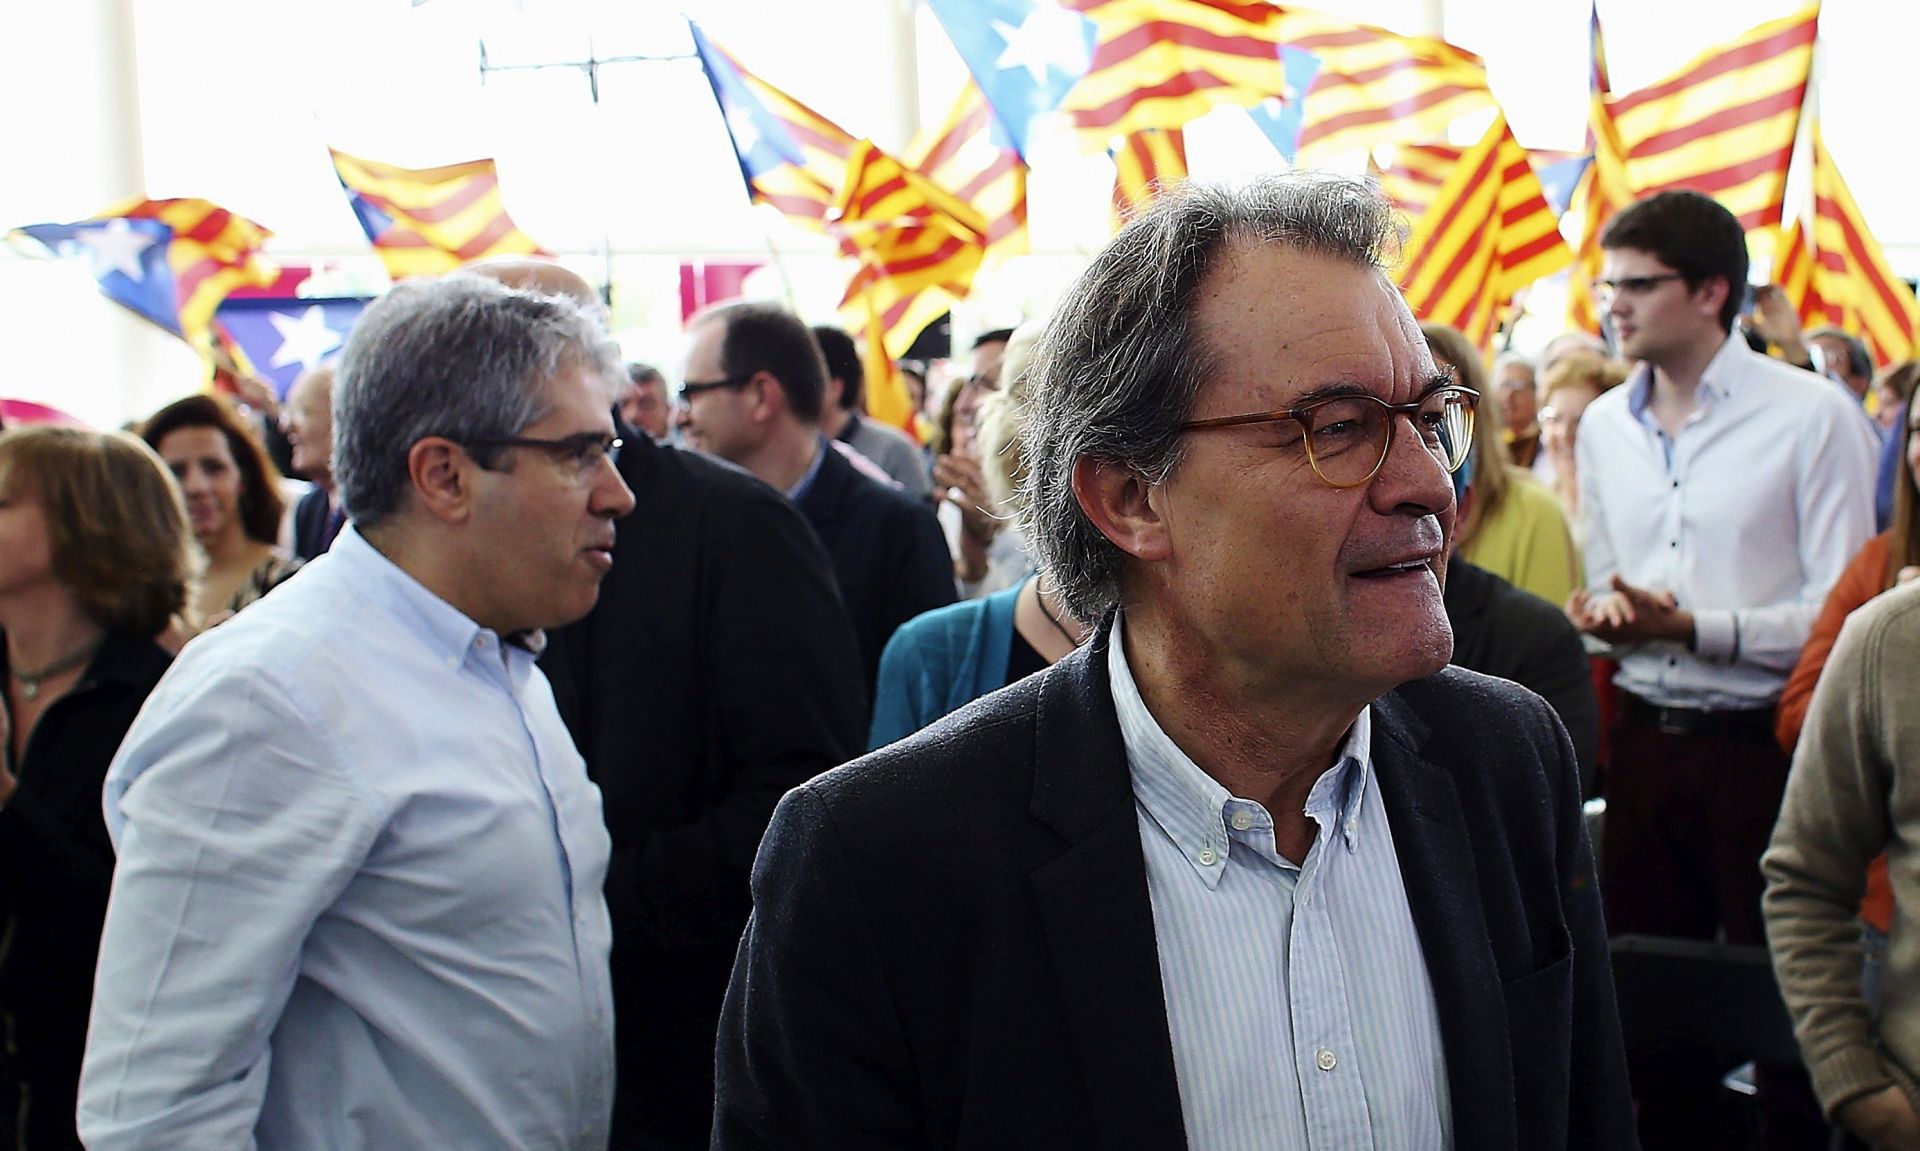 epa05869841 Catalonian former regional president, Artur Mas, attends an act organized by the Catalan European Democratic Party (PDeCaT) to campaign in favor of Catalonia's independence in Barcelona, Spain, 25 March 2017. The act has also been held to support former regional President Artur Mas after he was sentenced to a two-year long disqualification for holding a non-binding popular referendum on the region's secession from Spain, back in 2014, despite it being banned by the Constitutional Court.  EPA/ALEJANDRO GARCIA